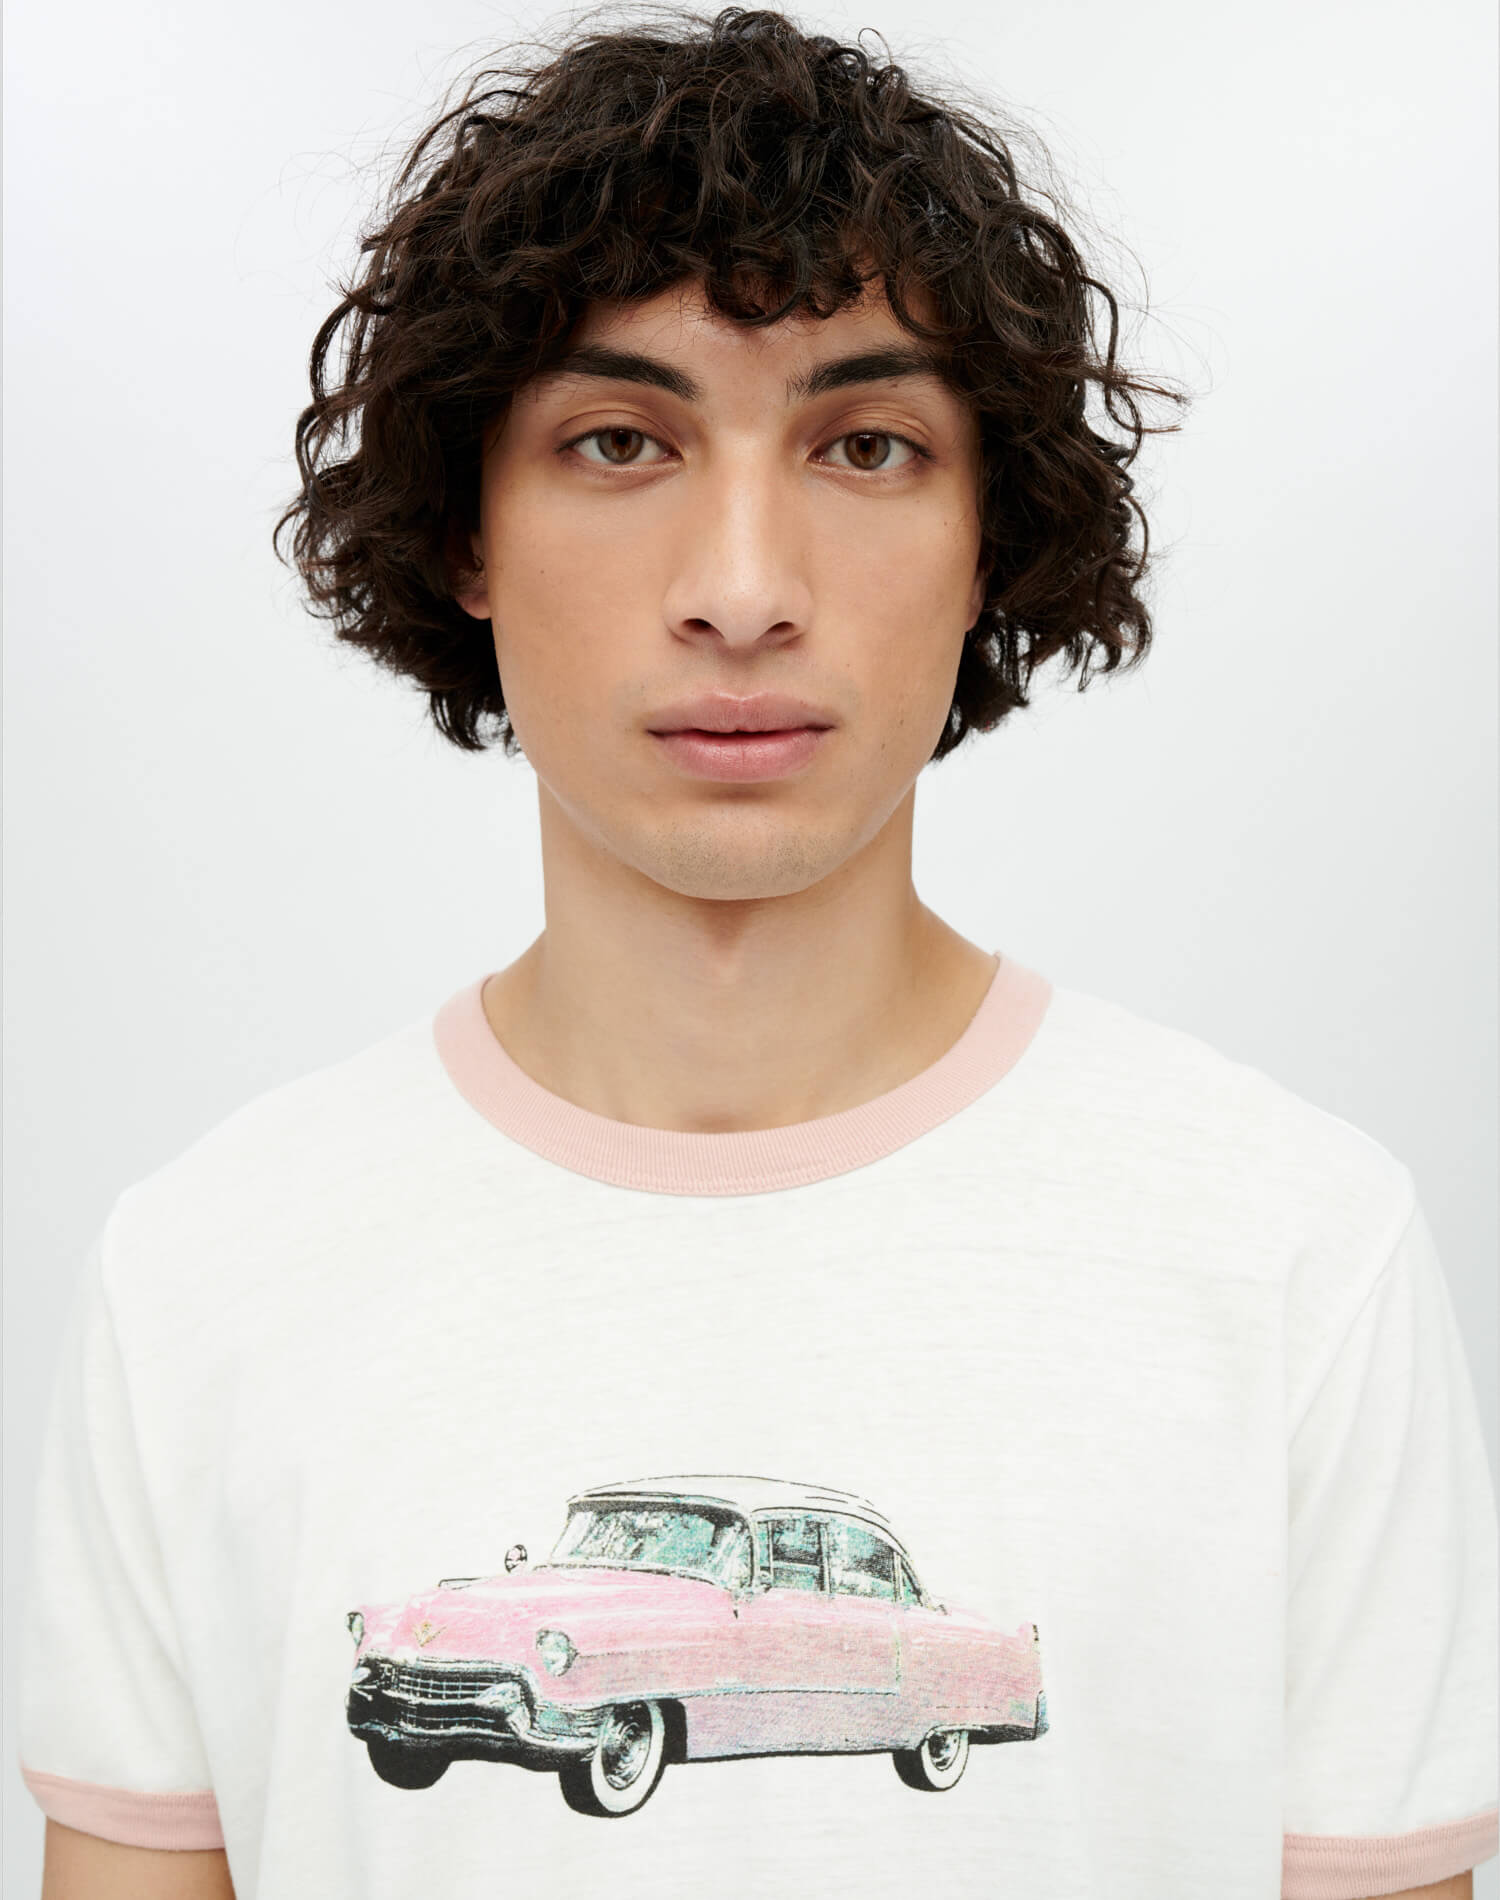 Ringer "Pink Caddy" Tee - Old White Pink